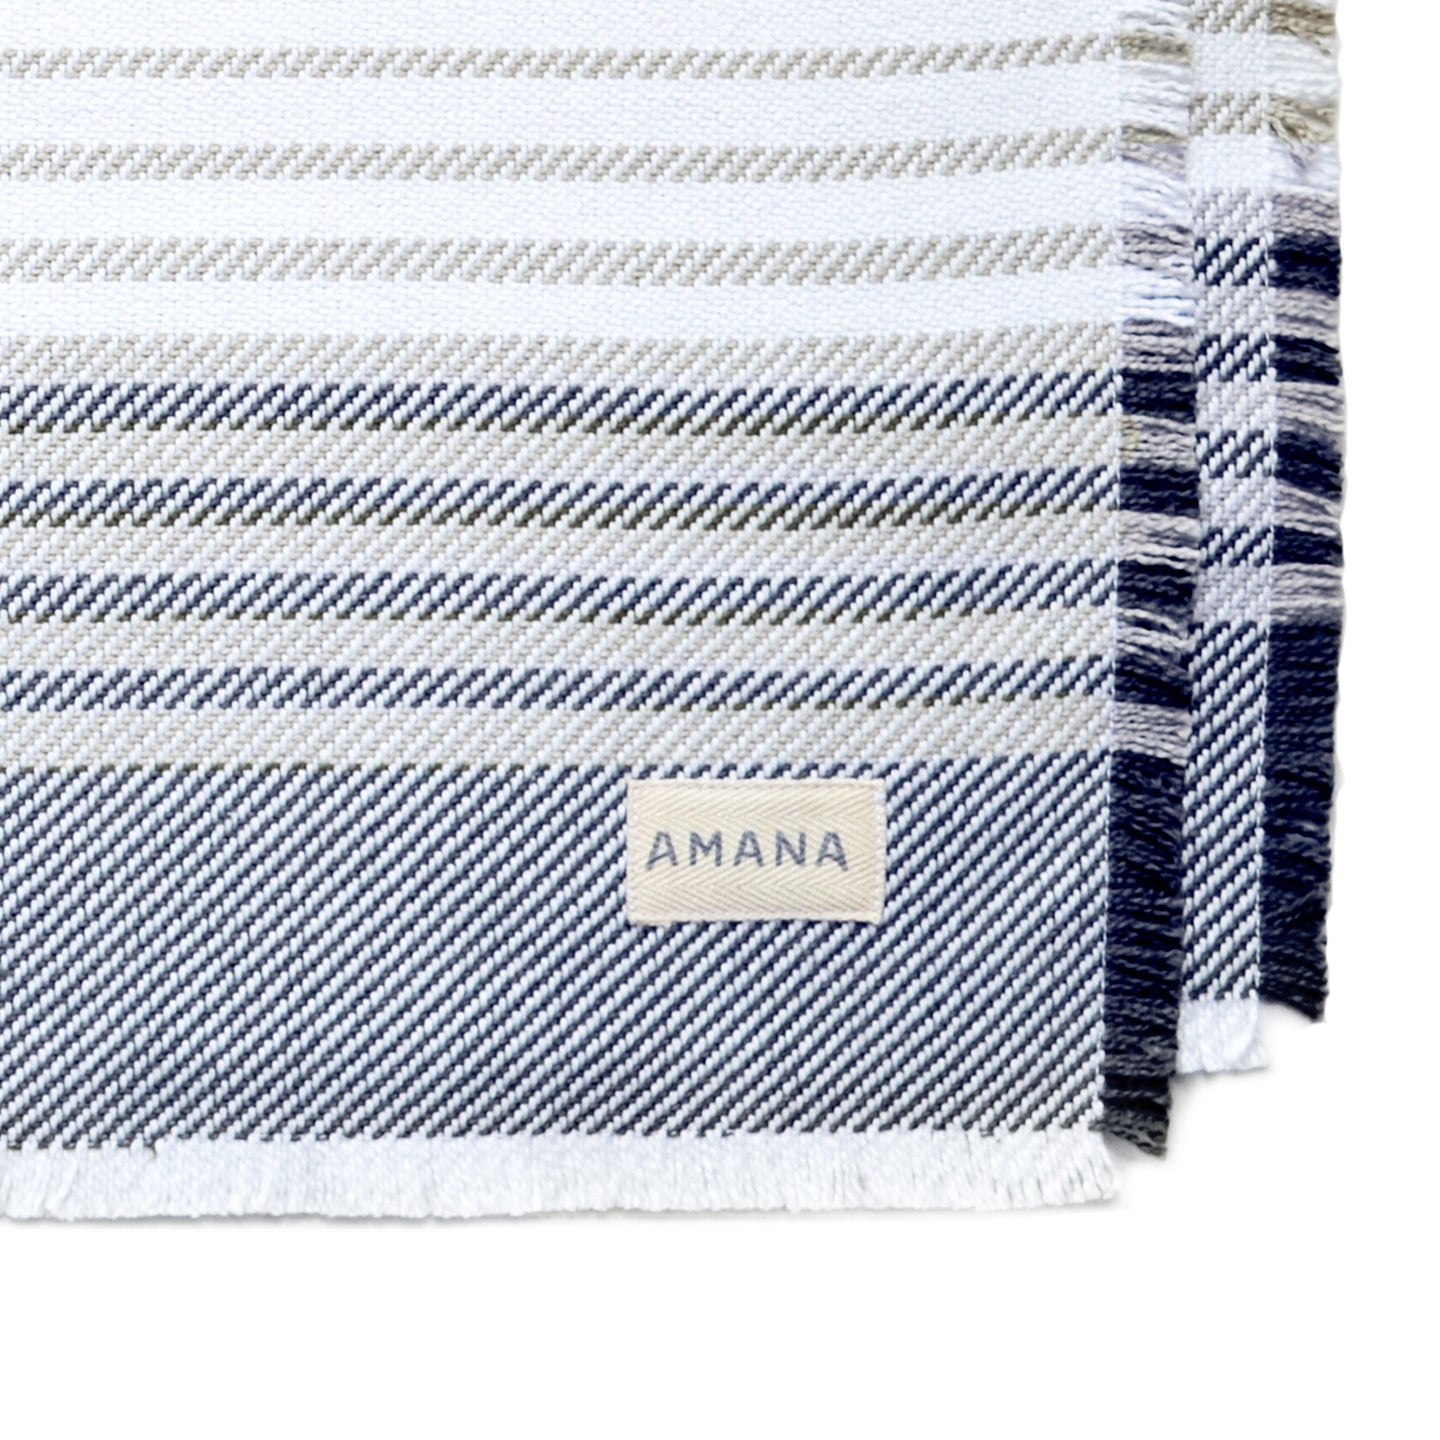 corner of navy/dark linen contempo placemat with Amana label